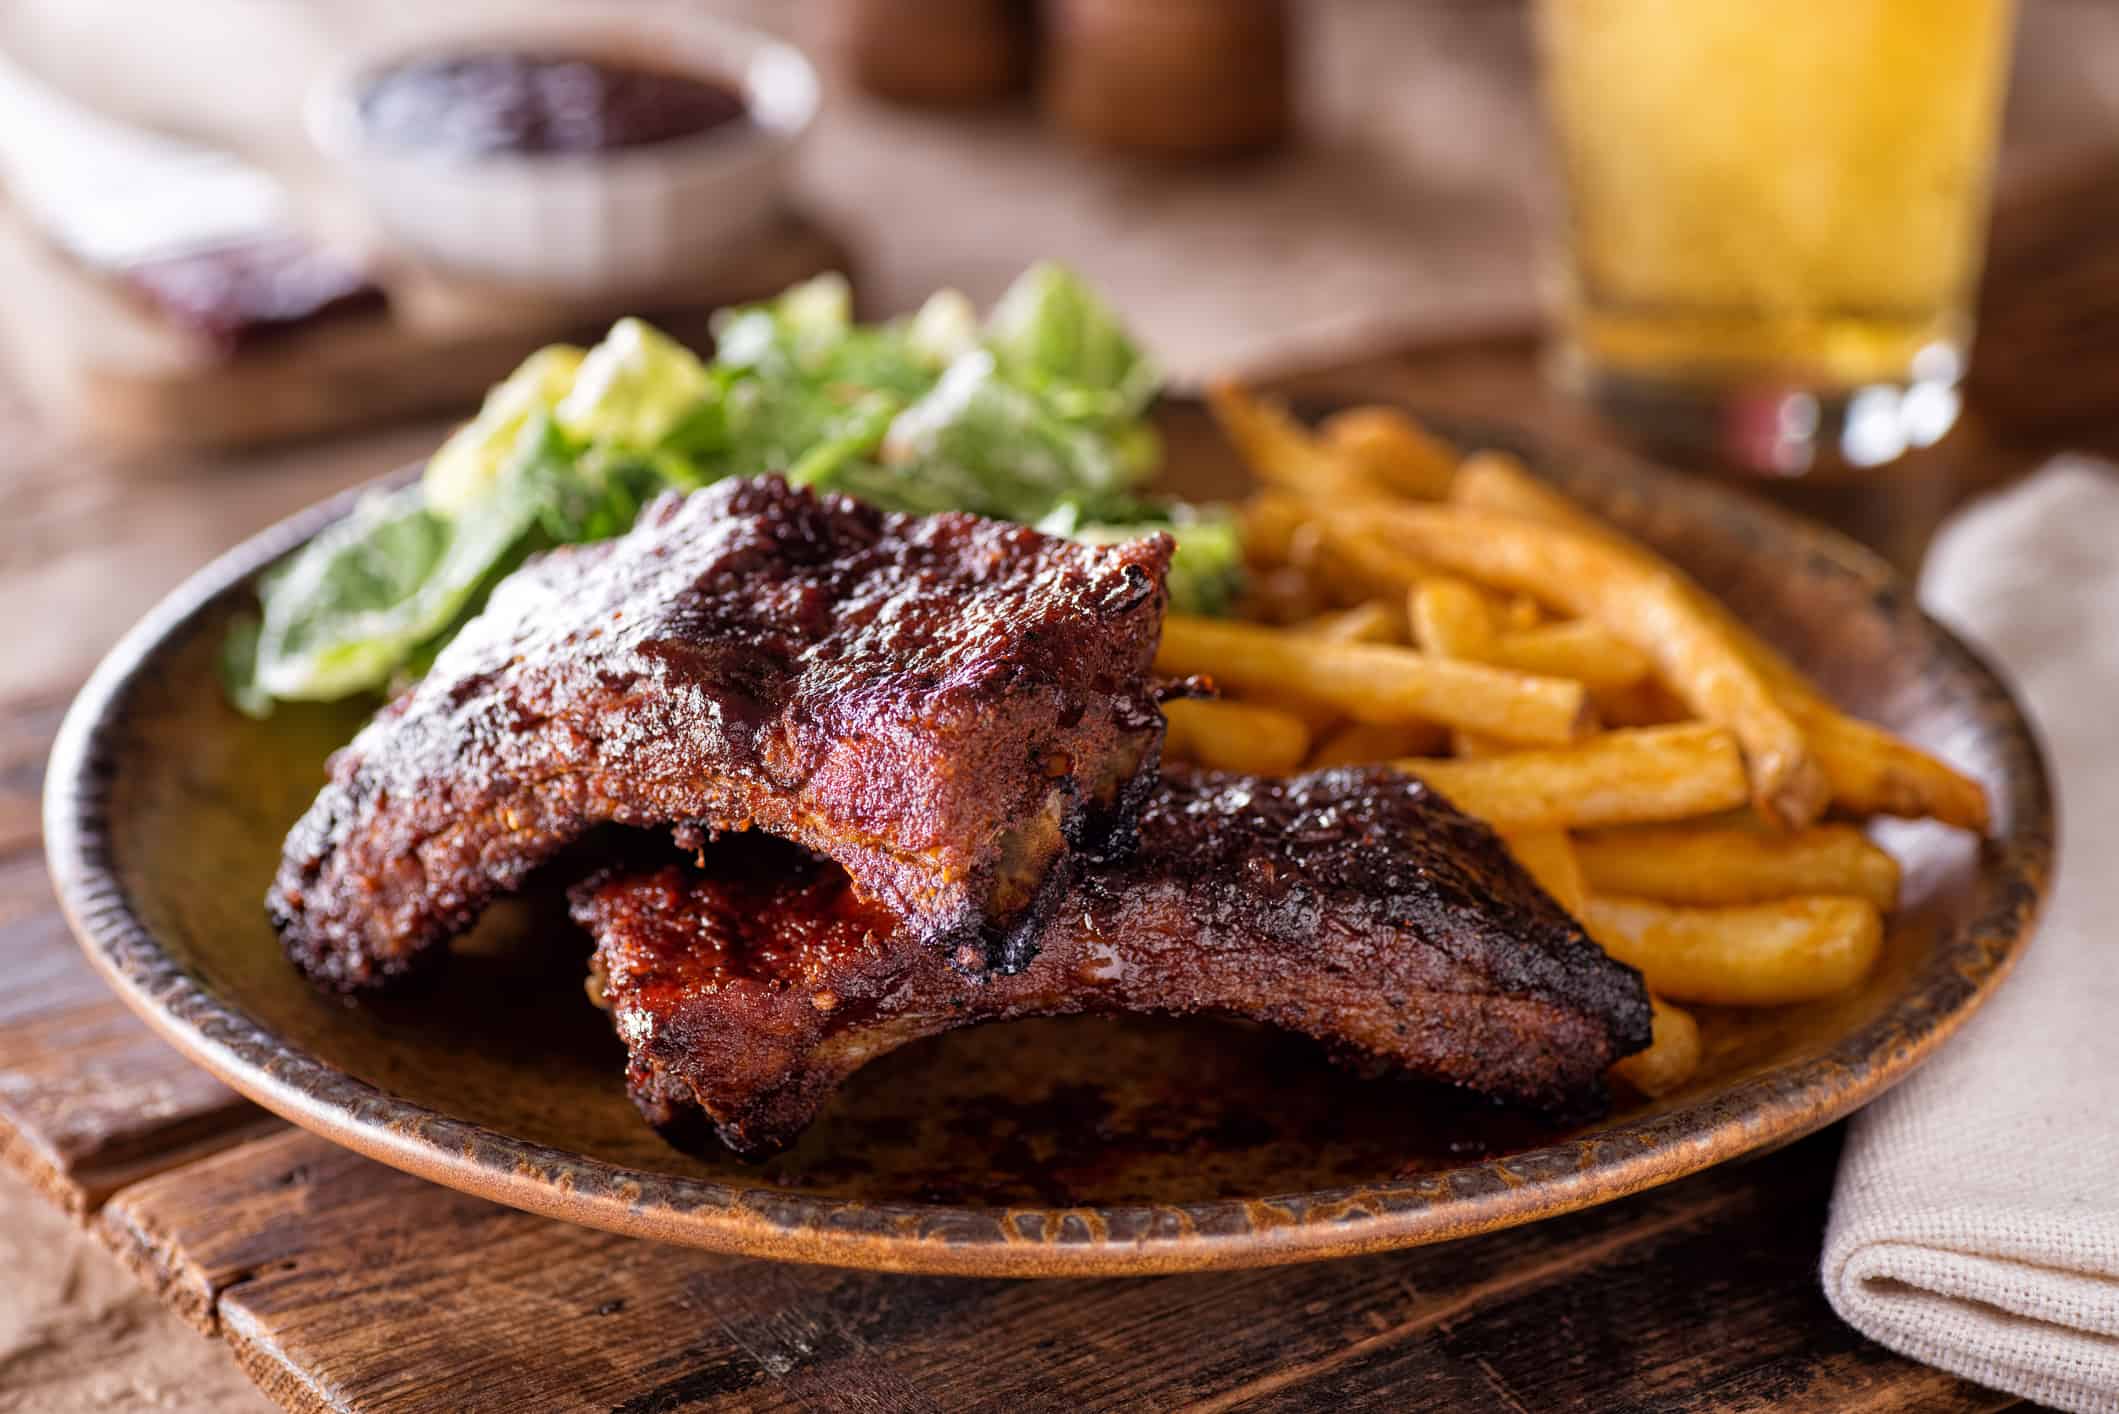 A plate of delicious barbecued ribs with french fries and salad.